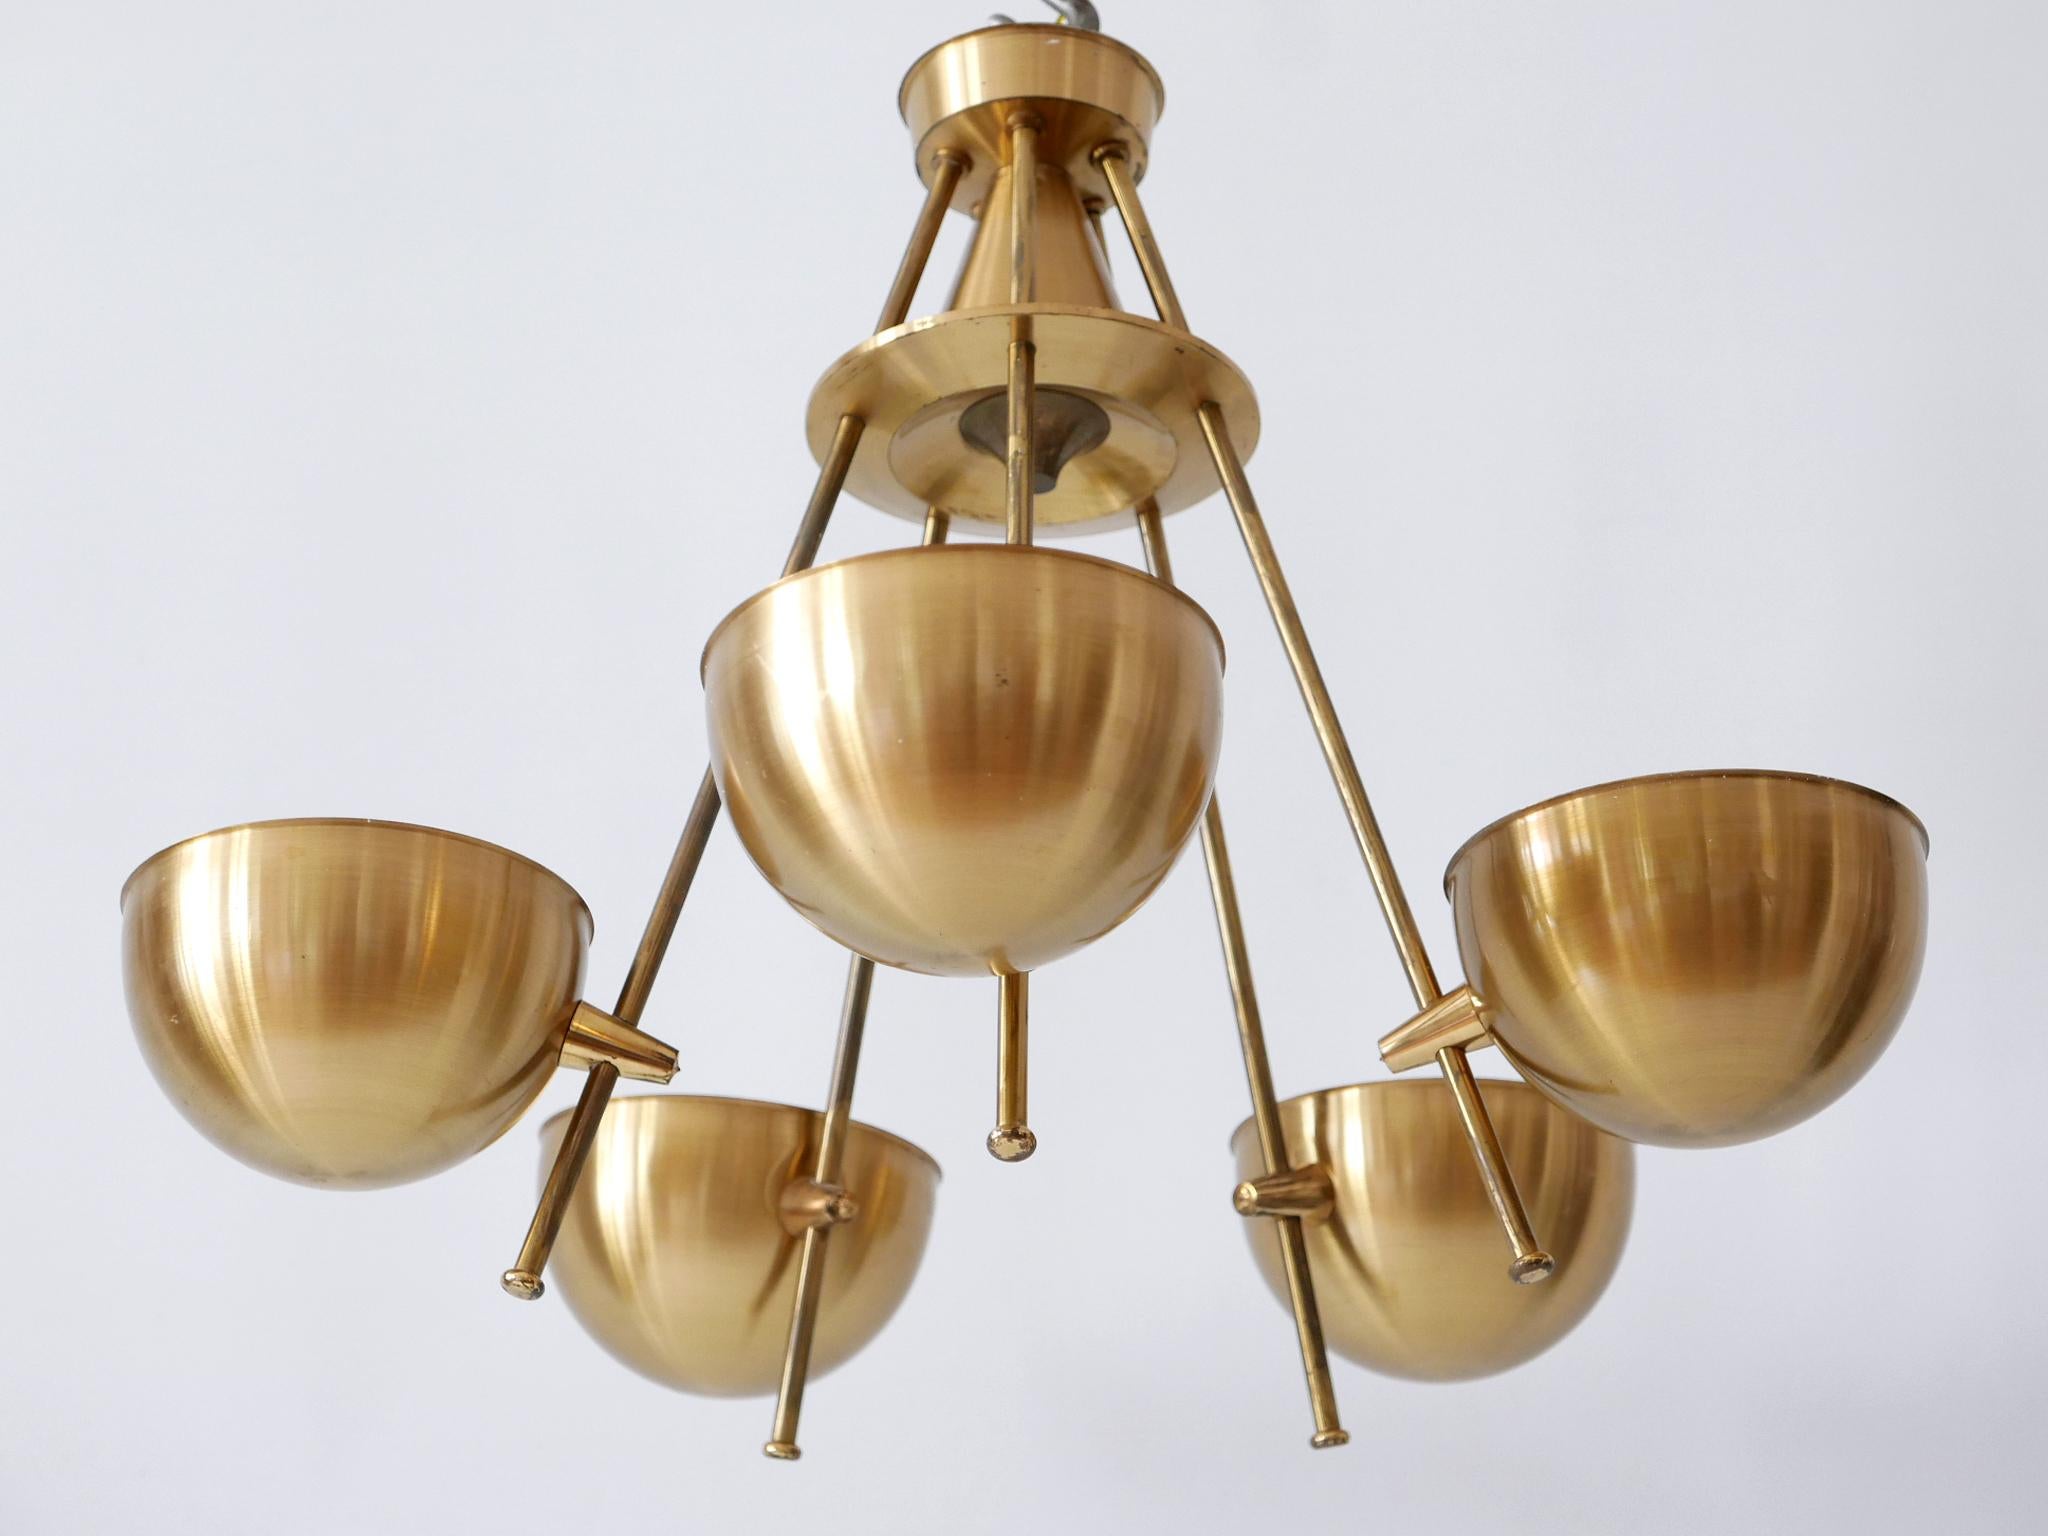 Exceptional Mid-Century Five-Flamed Chandelier or Pendant Lamp Sweden 1950s For Sale 3